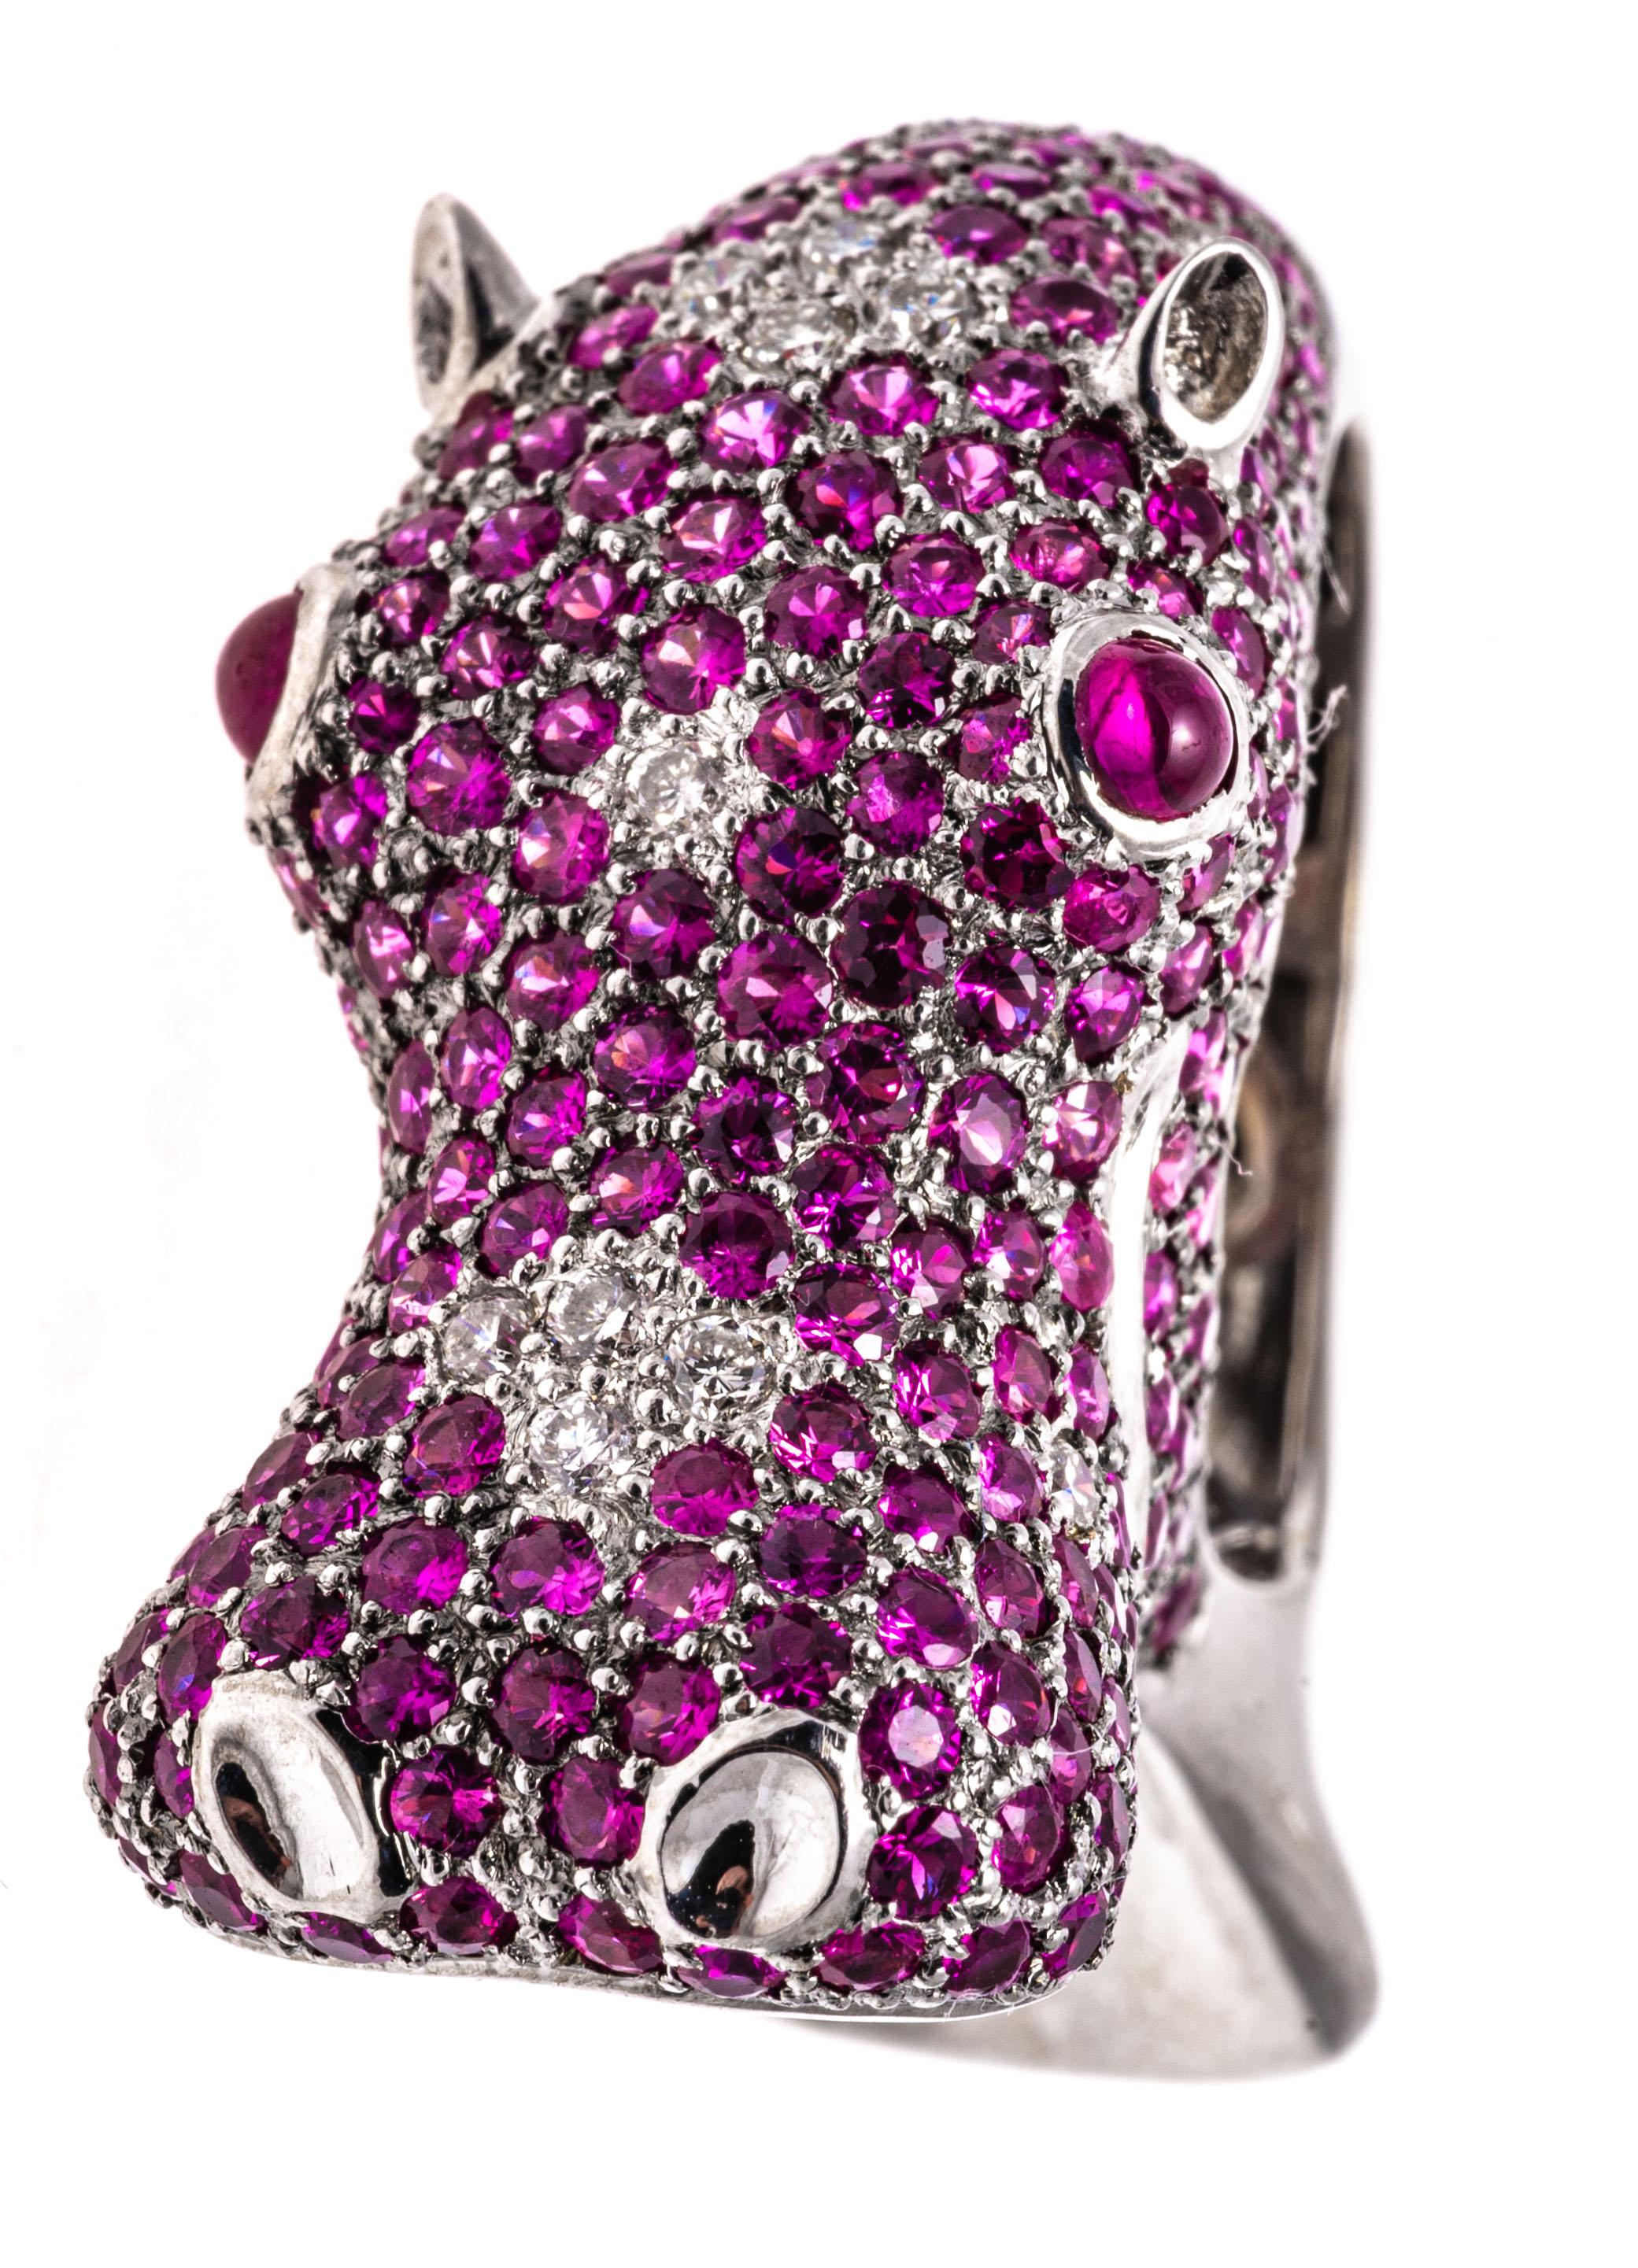 18k white gold ring ring. This beautiful ring is a playful roaring hippopotamus, set in the entirety with pave set, round faceted, medium pink color pink sapphires, approximately 4.94 TCW, and highlighted with punches of round faceted, white